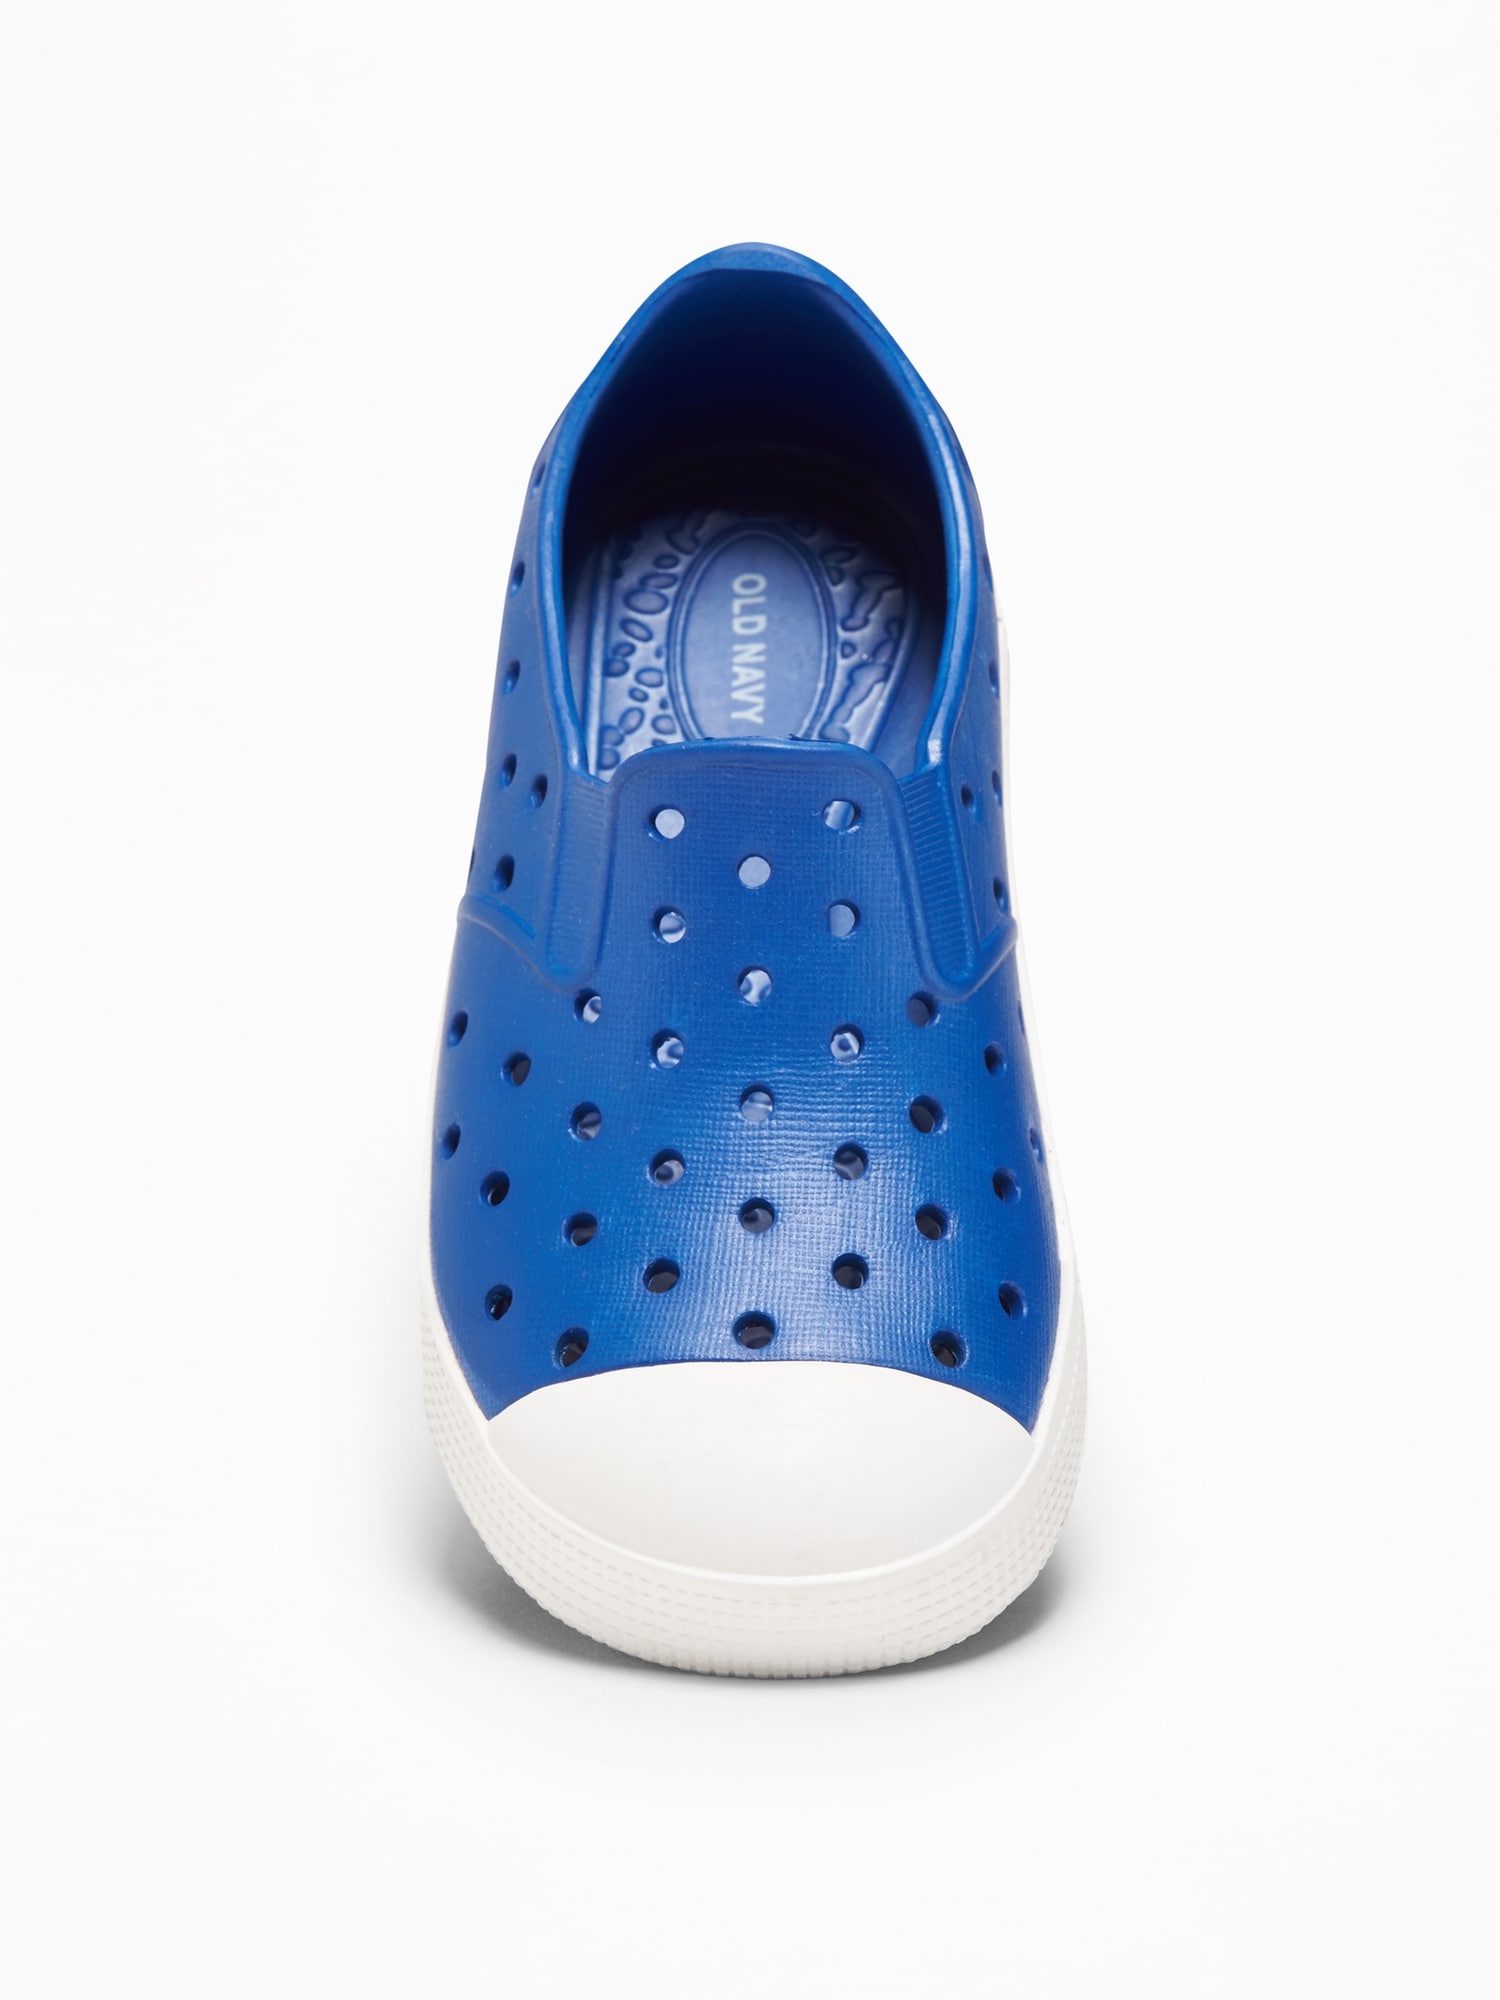 Perforated Pop-Color Slip-Ons For Toddler Boys | Old Navy